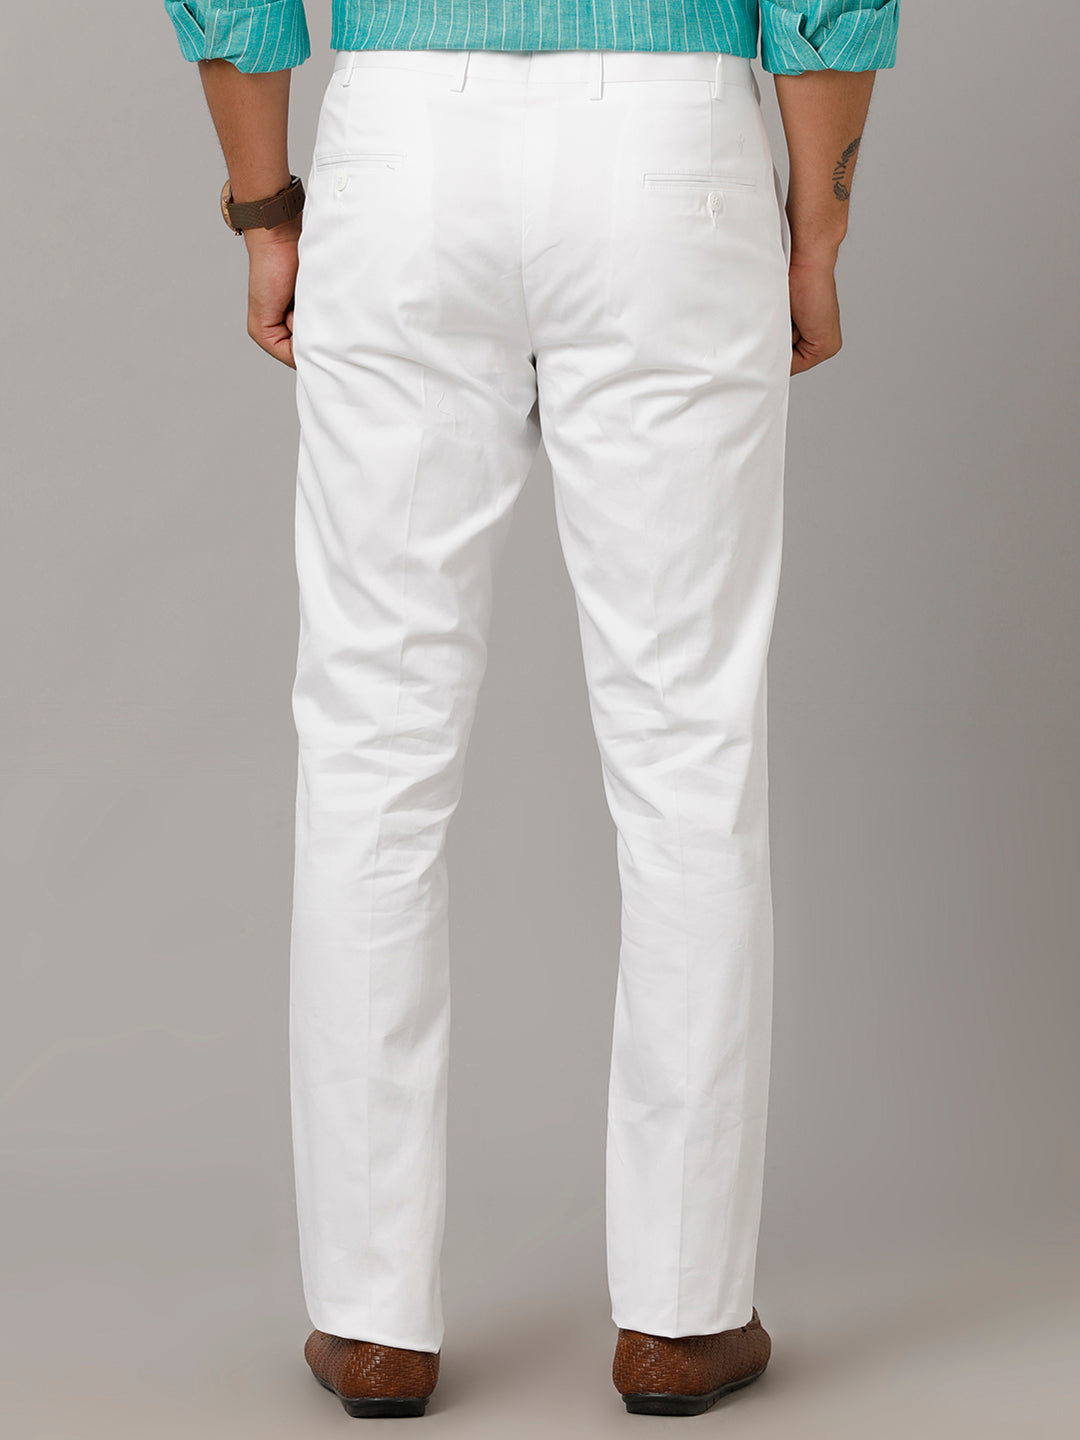 Mens Regular Fit Cotton White Pants Easy Care-Back view